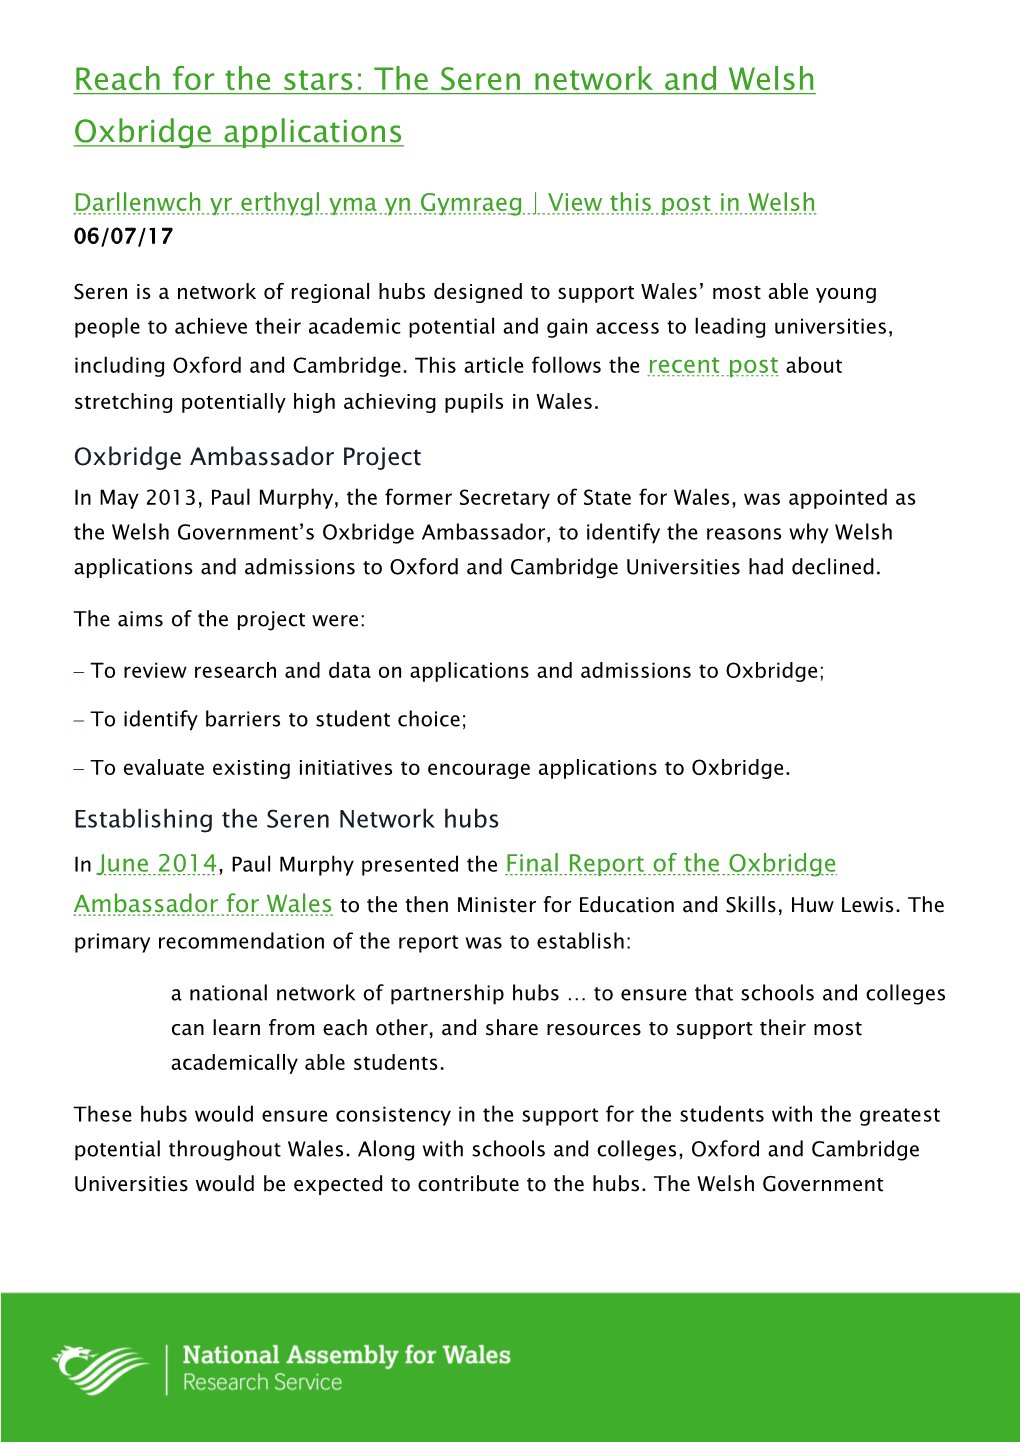 The Seren Network and Welsh Oxbridge Applications